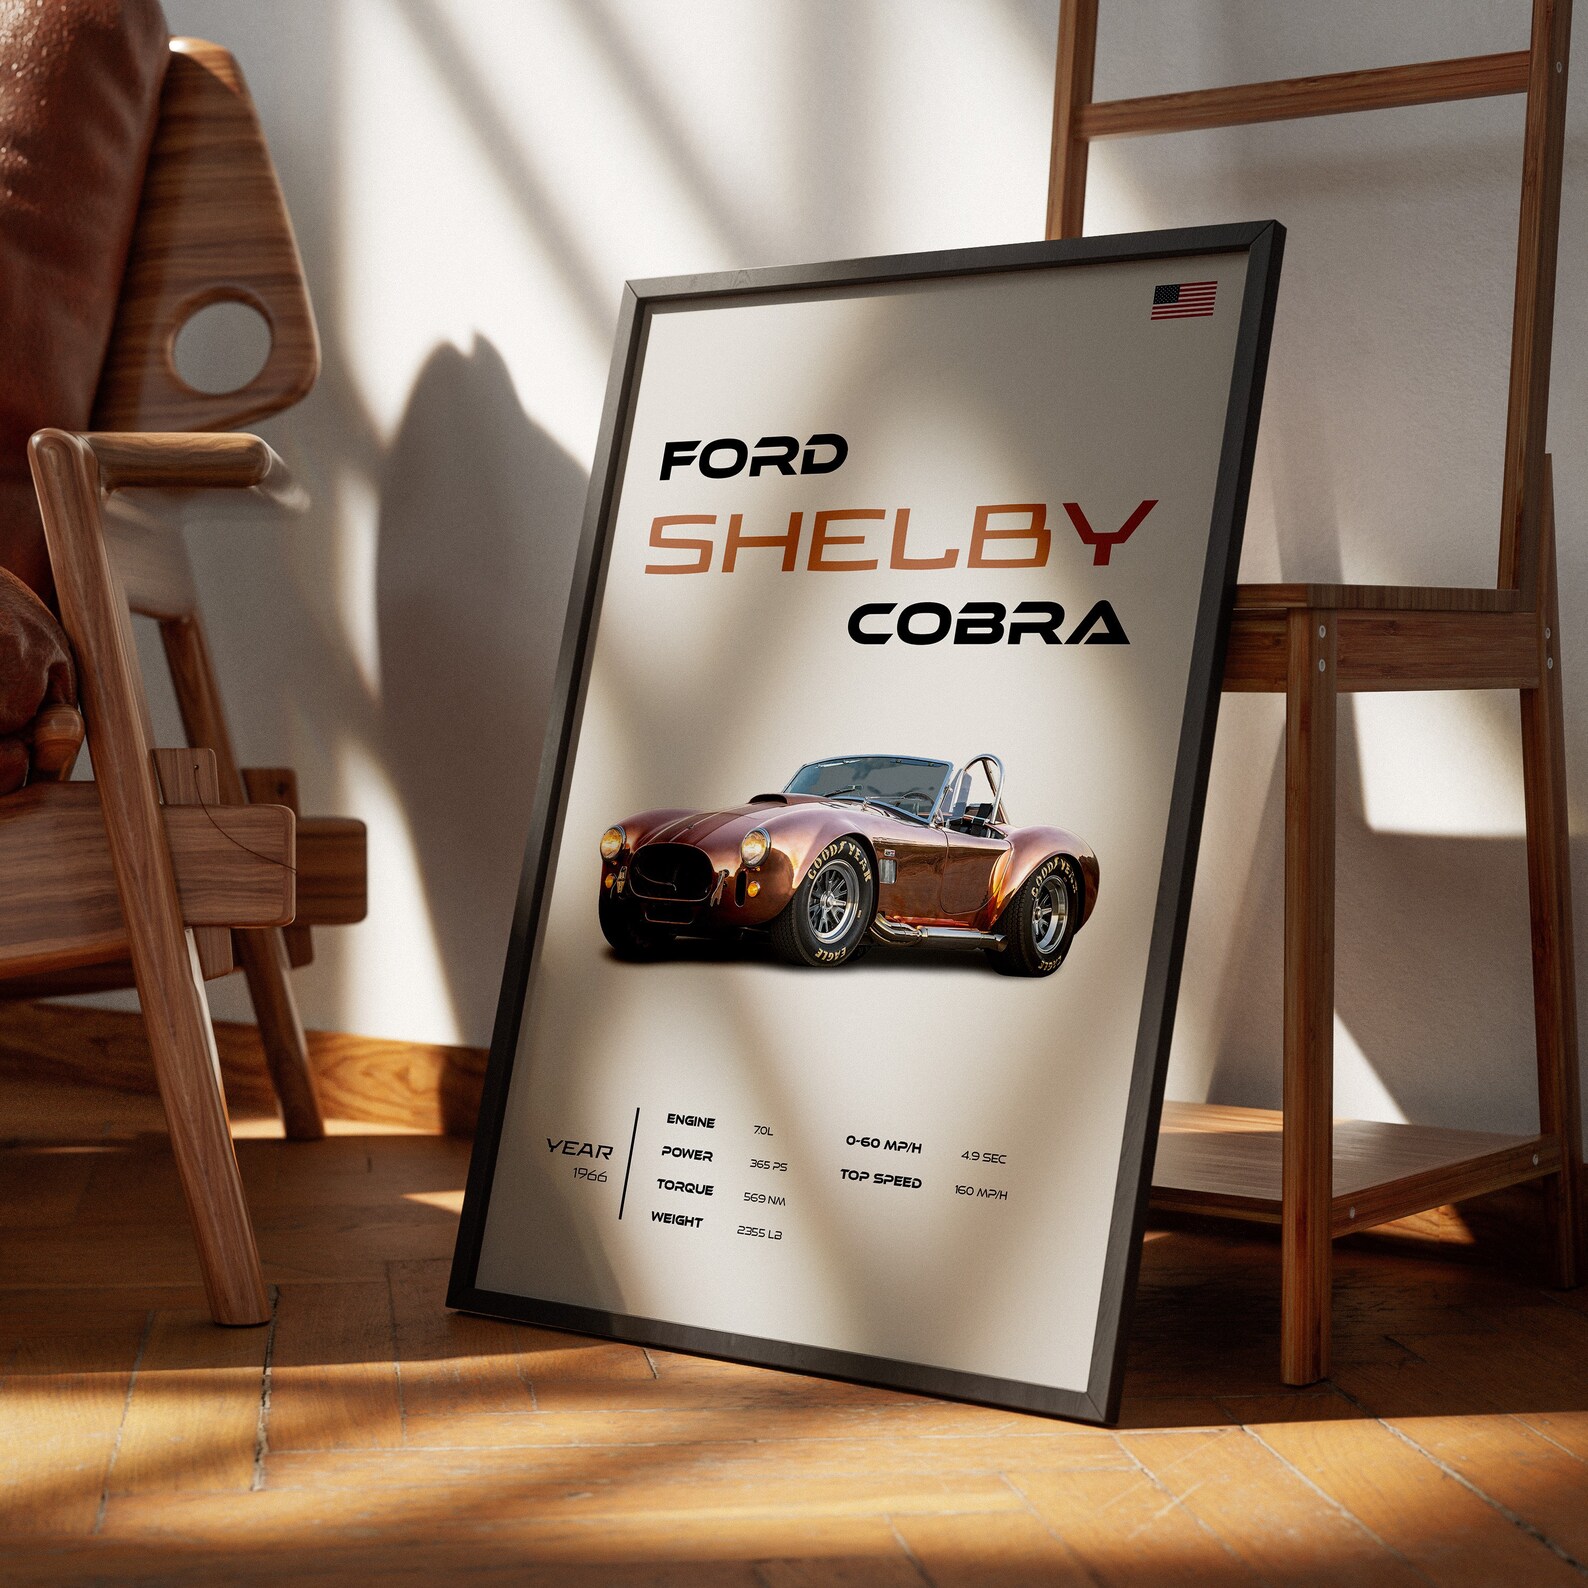 1966 Ford Shelby Cobra Classic Car Poster, Collector's Car Wall Art ...